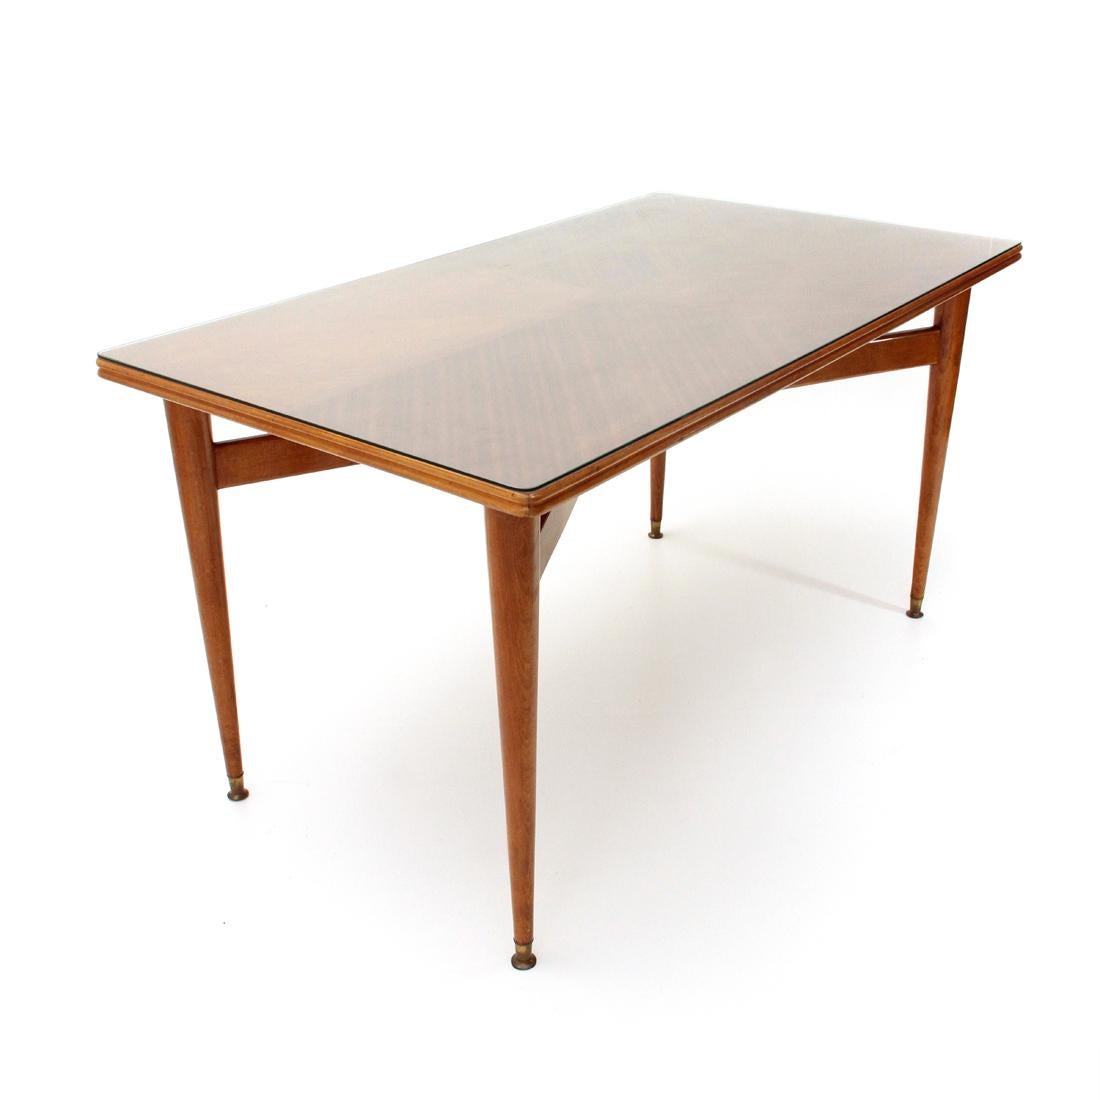 Mid-20th Century Italian Dining Table with Brass Feet, 1950s